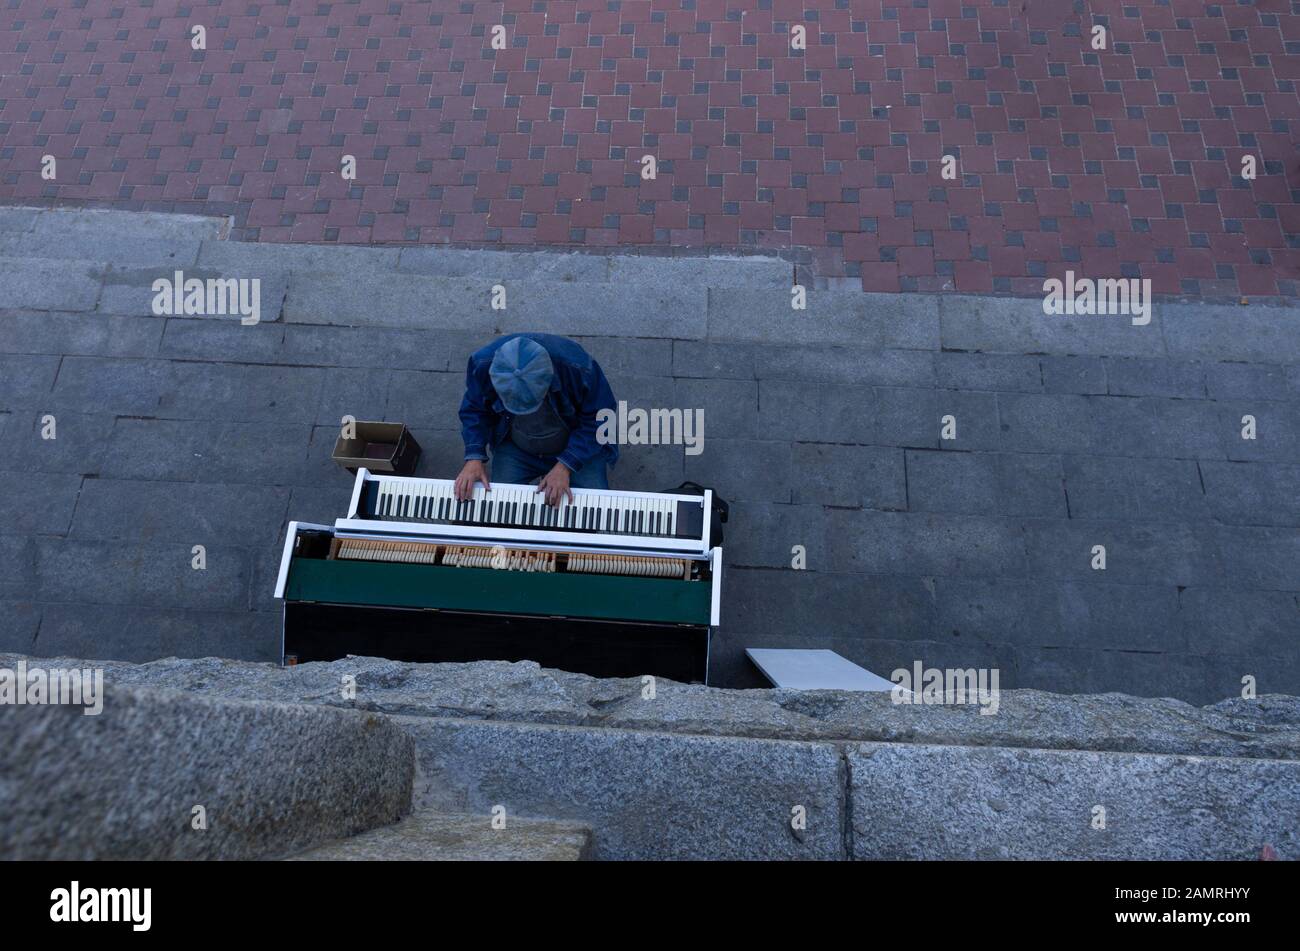 A man plays the piano. Street music on the piano. Top. Stock Photo